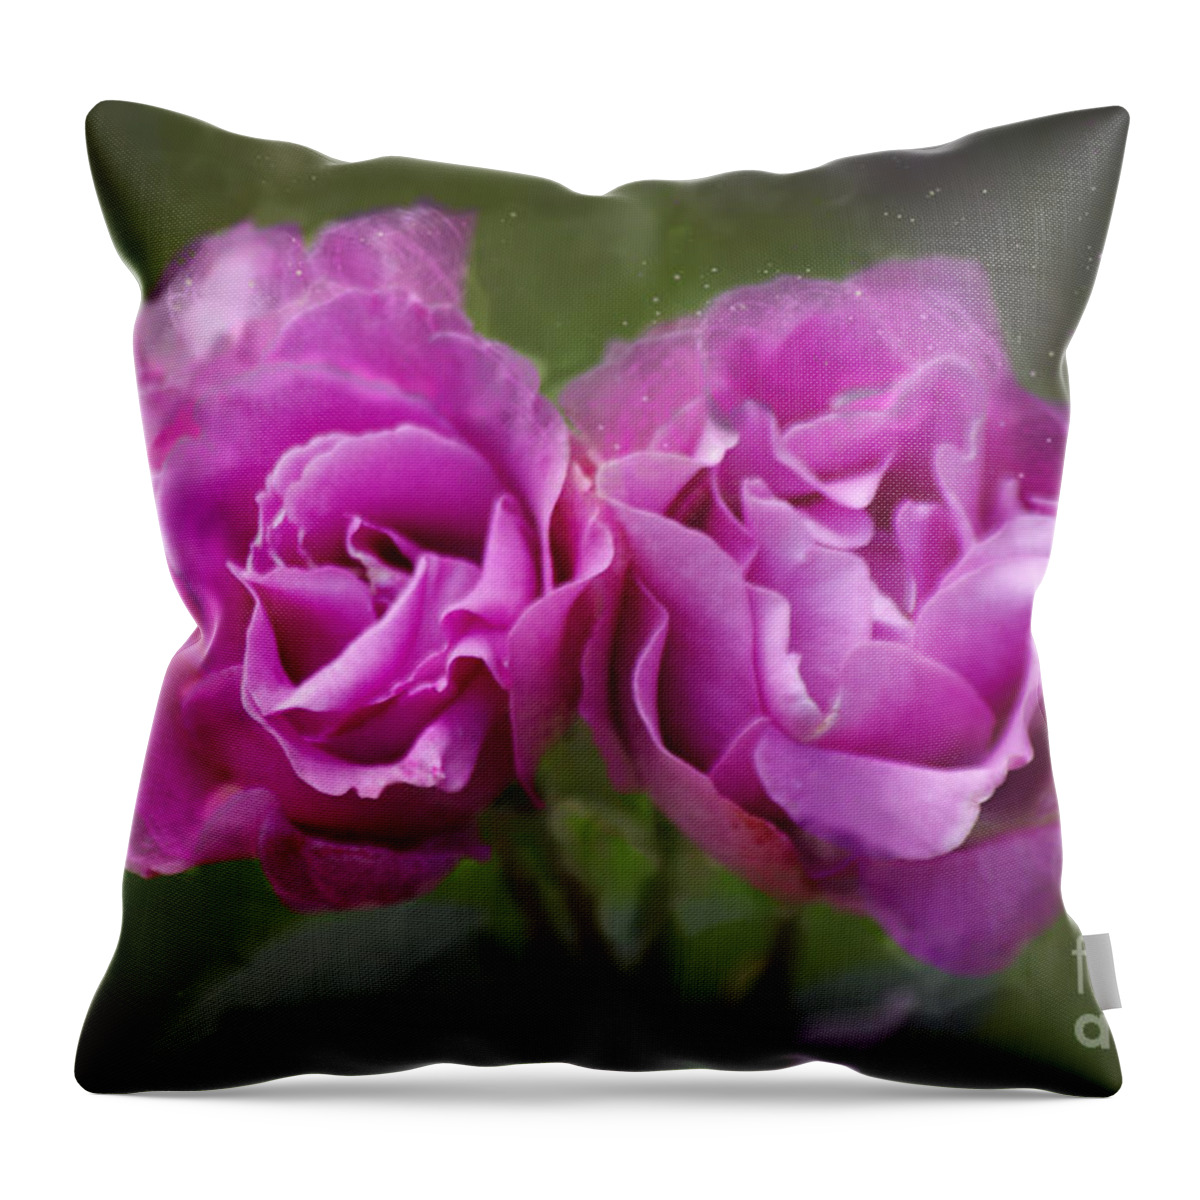 Adria Trail Throw Pillow featuring the photograph Rosey Twins by Adria Trail